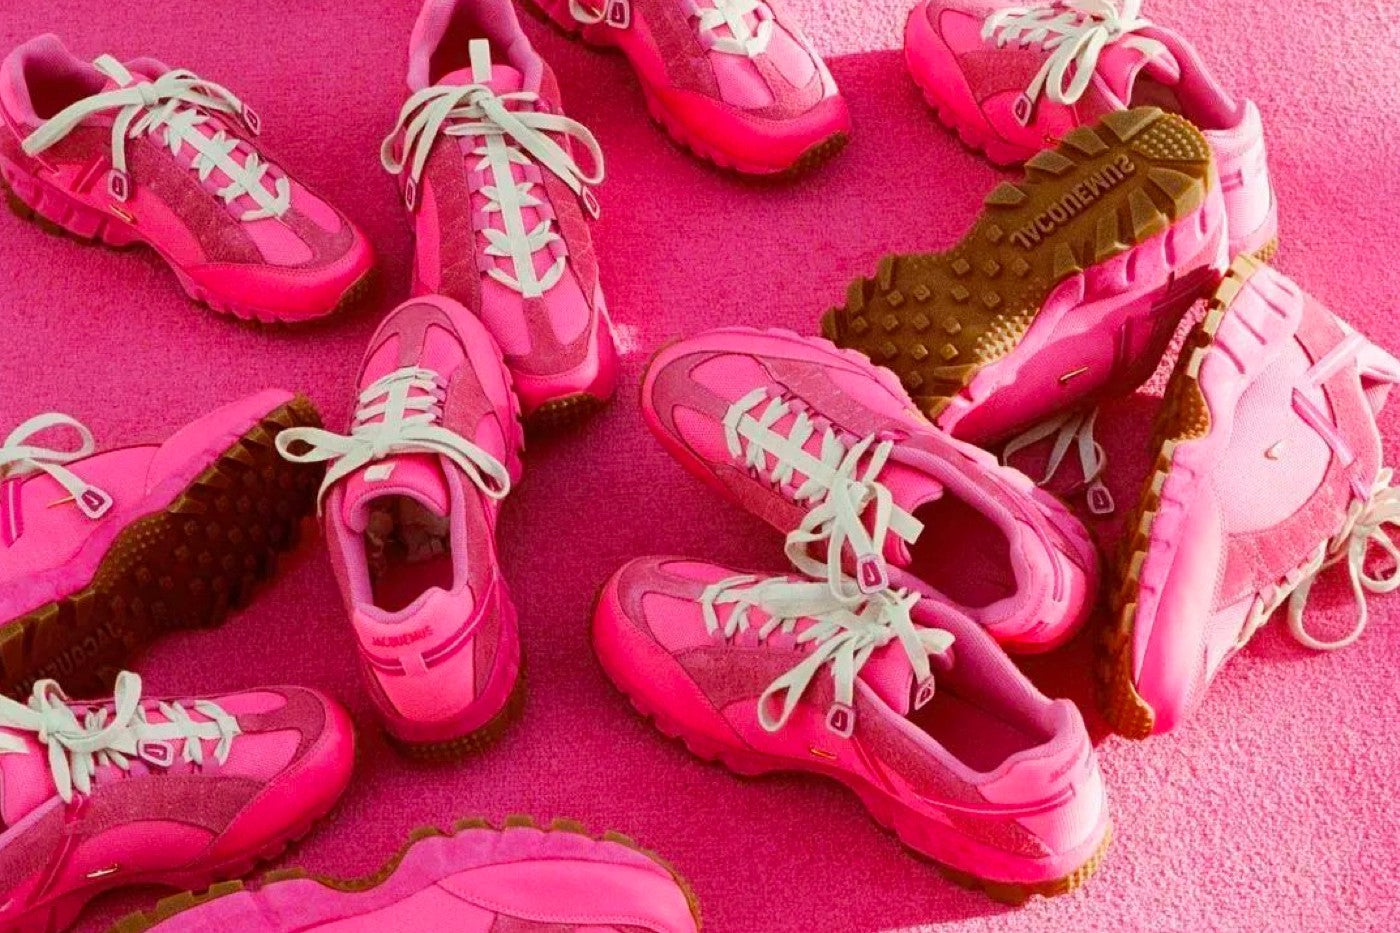 10 Pretty Pink Sneakers to Add to Your Collection for That Barbiecore Aesthetic